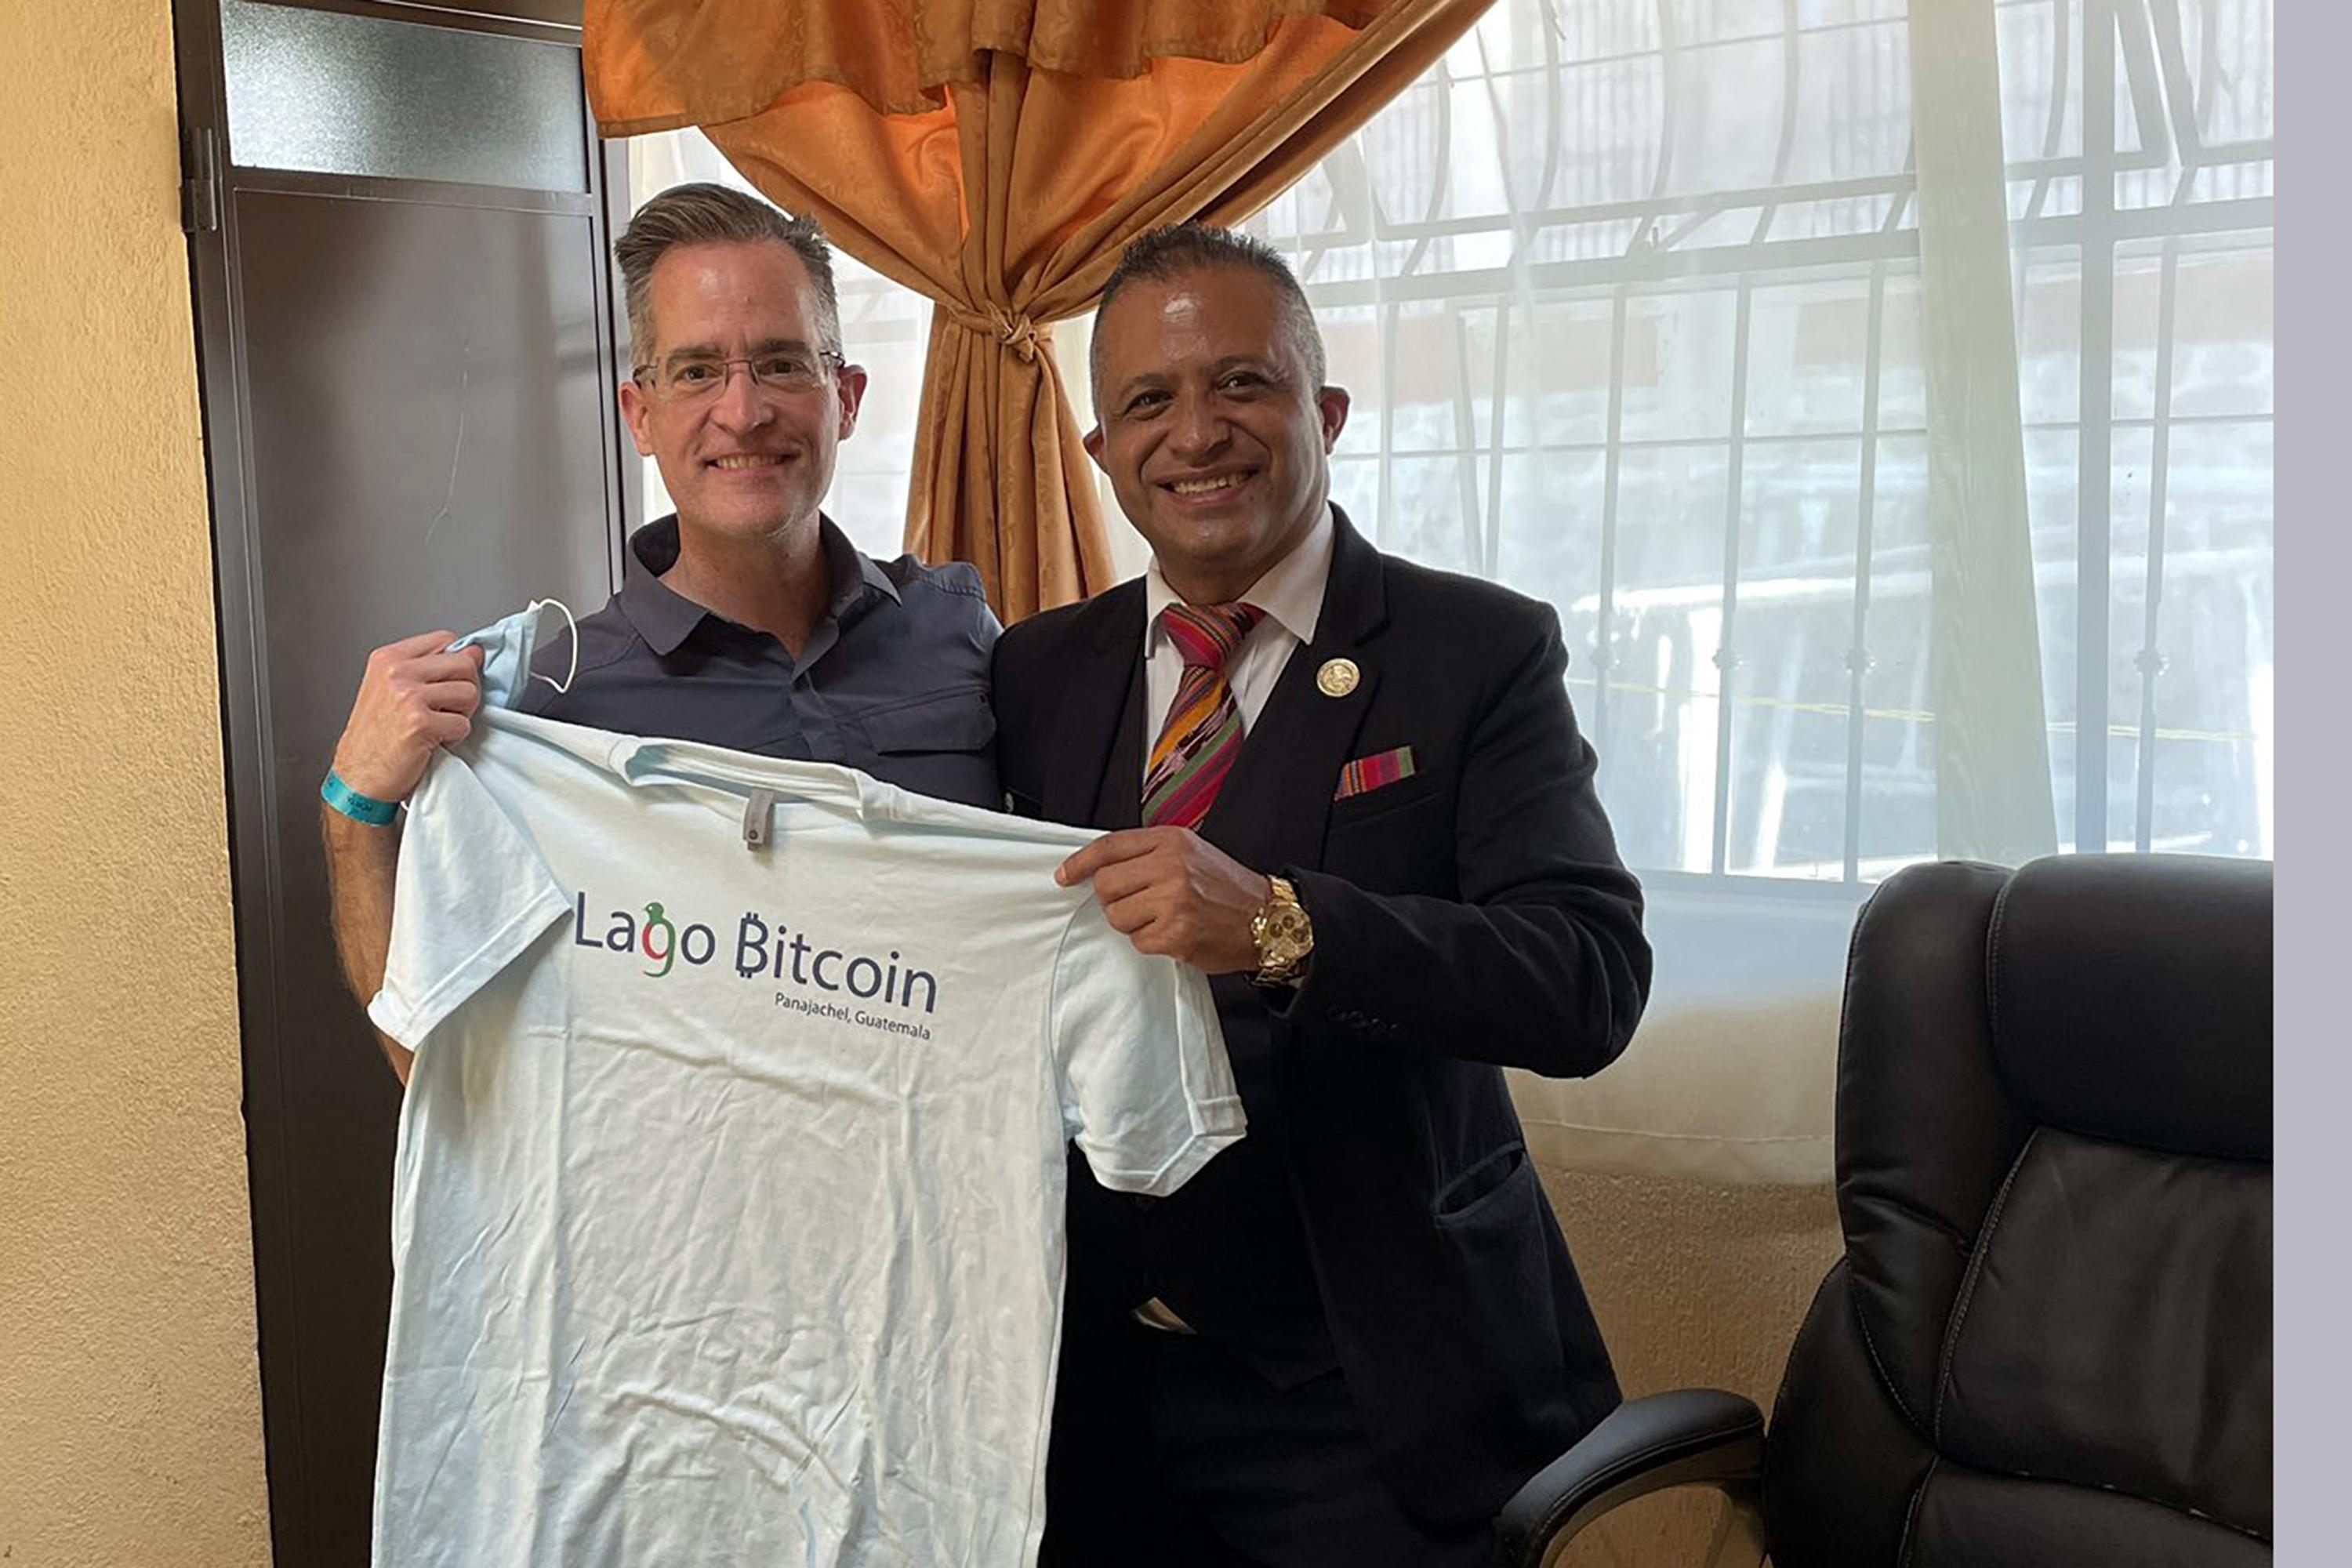 Patrick Melder first met with Panajachel Mayor César Piedrasanta on Jan. 25, 2022. They spoke of the basics of bitcoin, discussed tourism and how to convert natural waste to energy, and left the mayor with $50 dollars’ worth of the cryptocurrency. Photo courtesy of Melder.